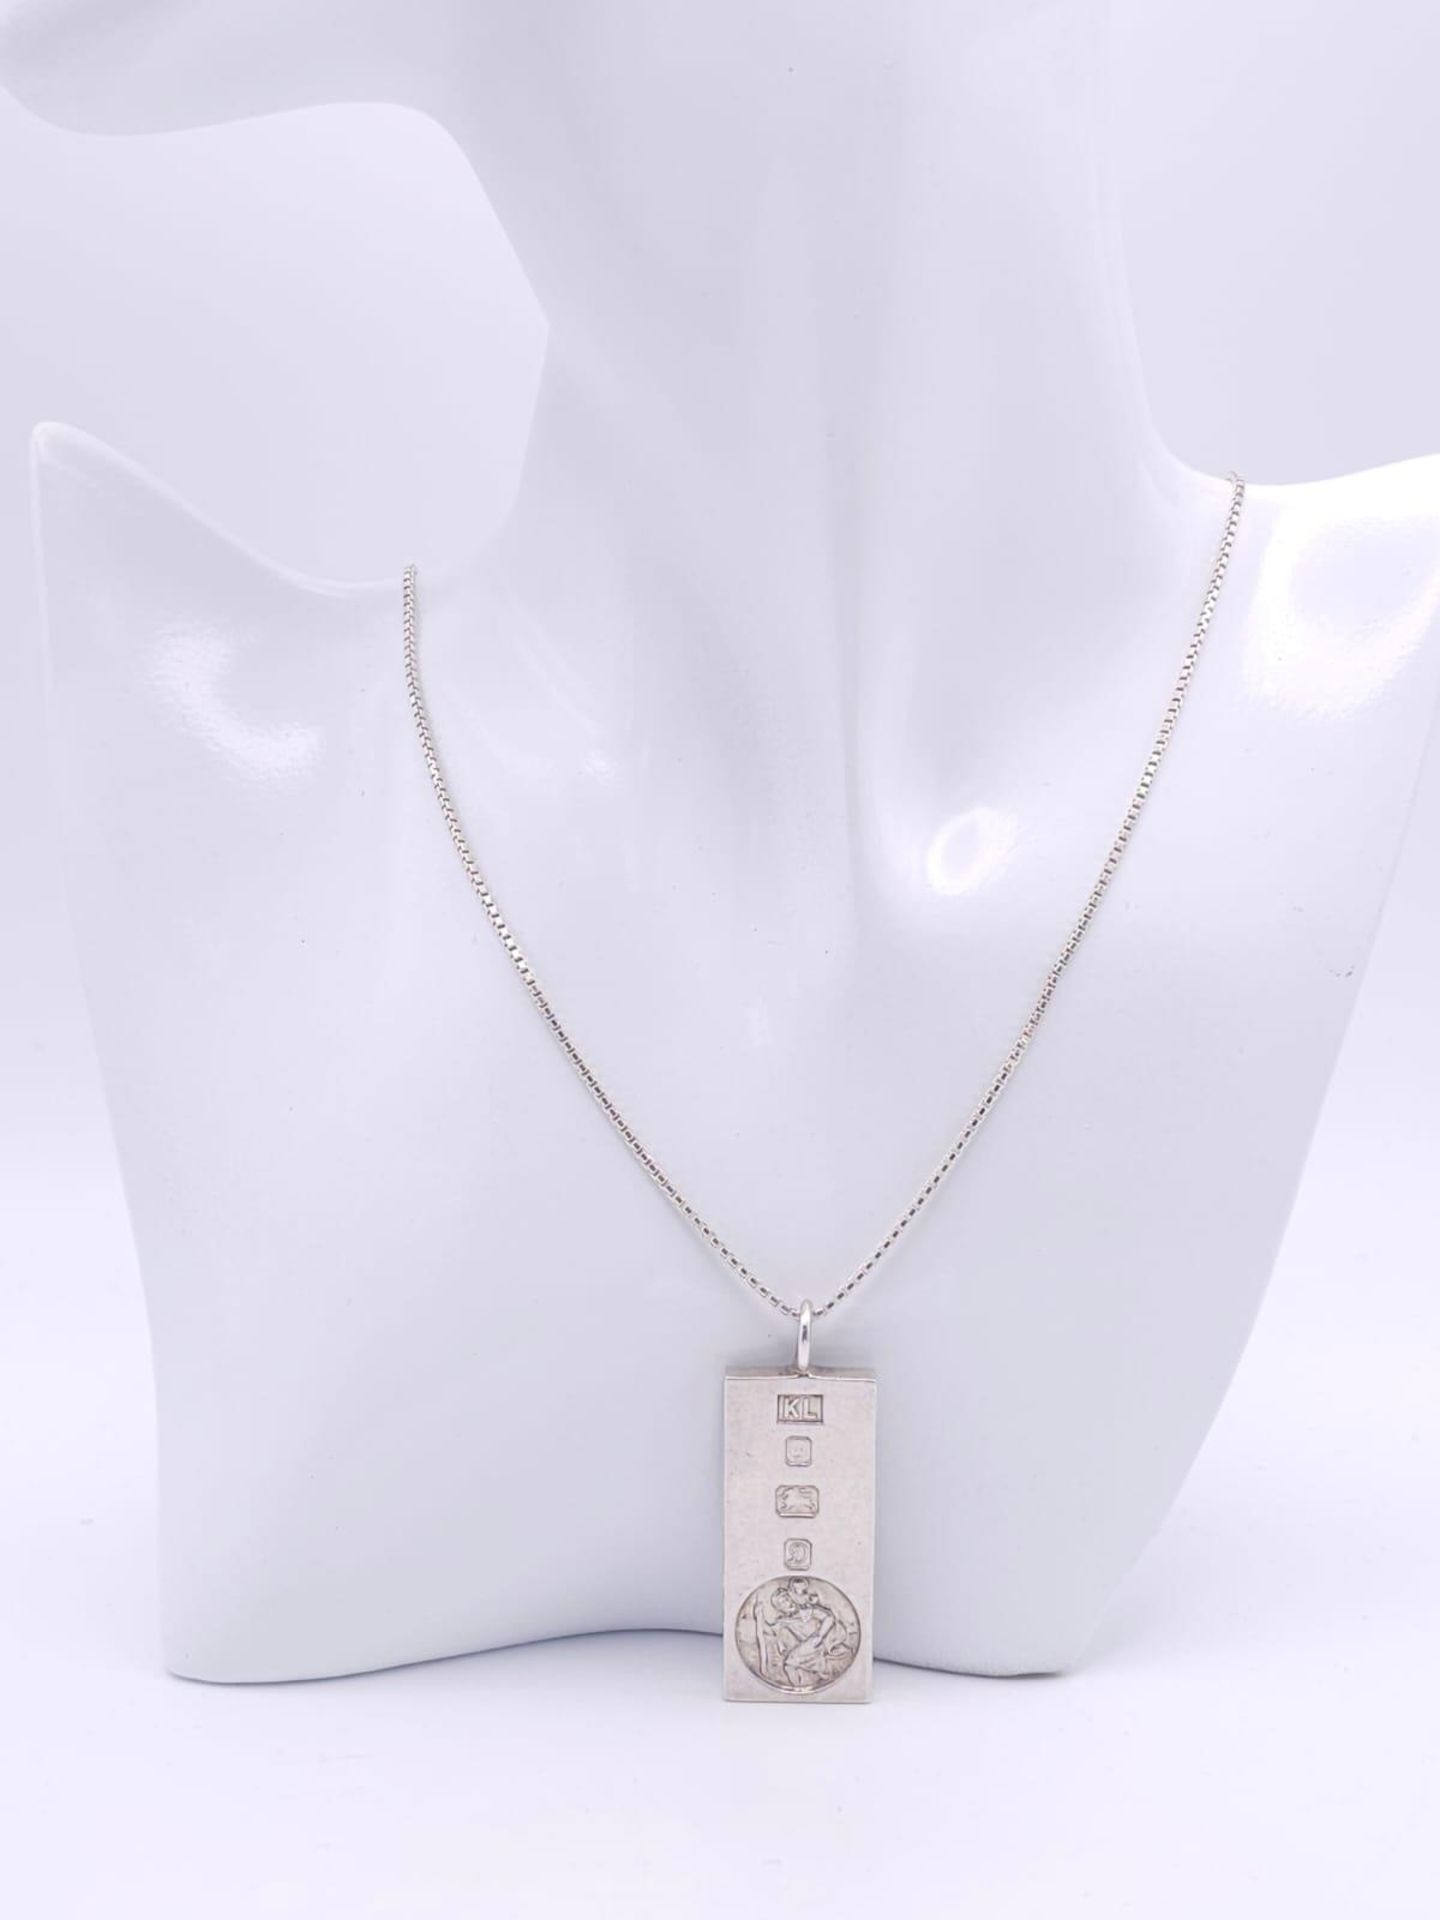 A Sterling Silver St. Christopher Ingot Pendant on a Silver Necklace. 5cm - pendant. 58cm necklace - Image 12 of 13